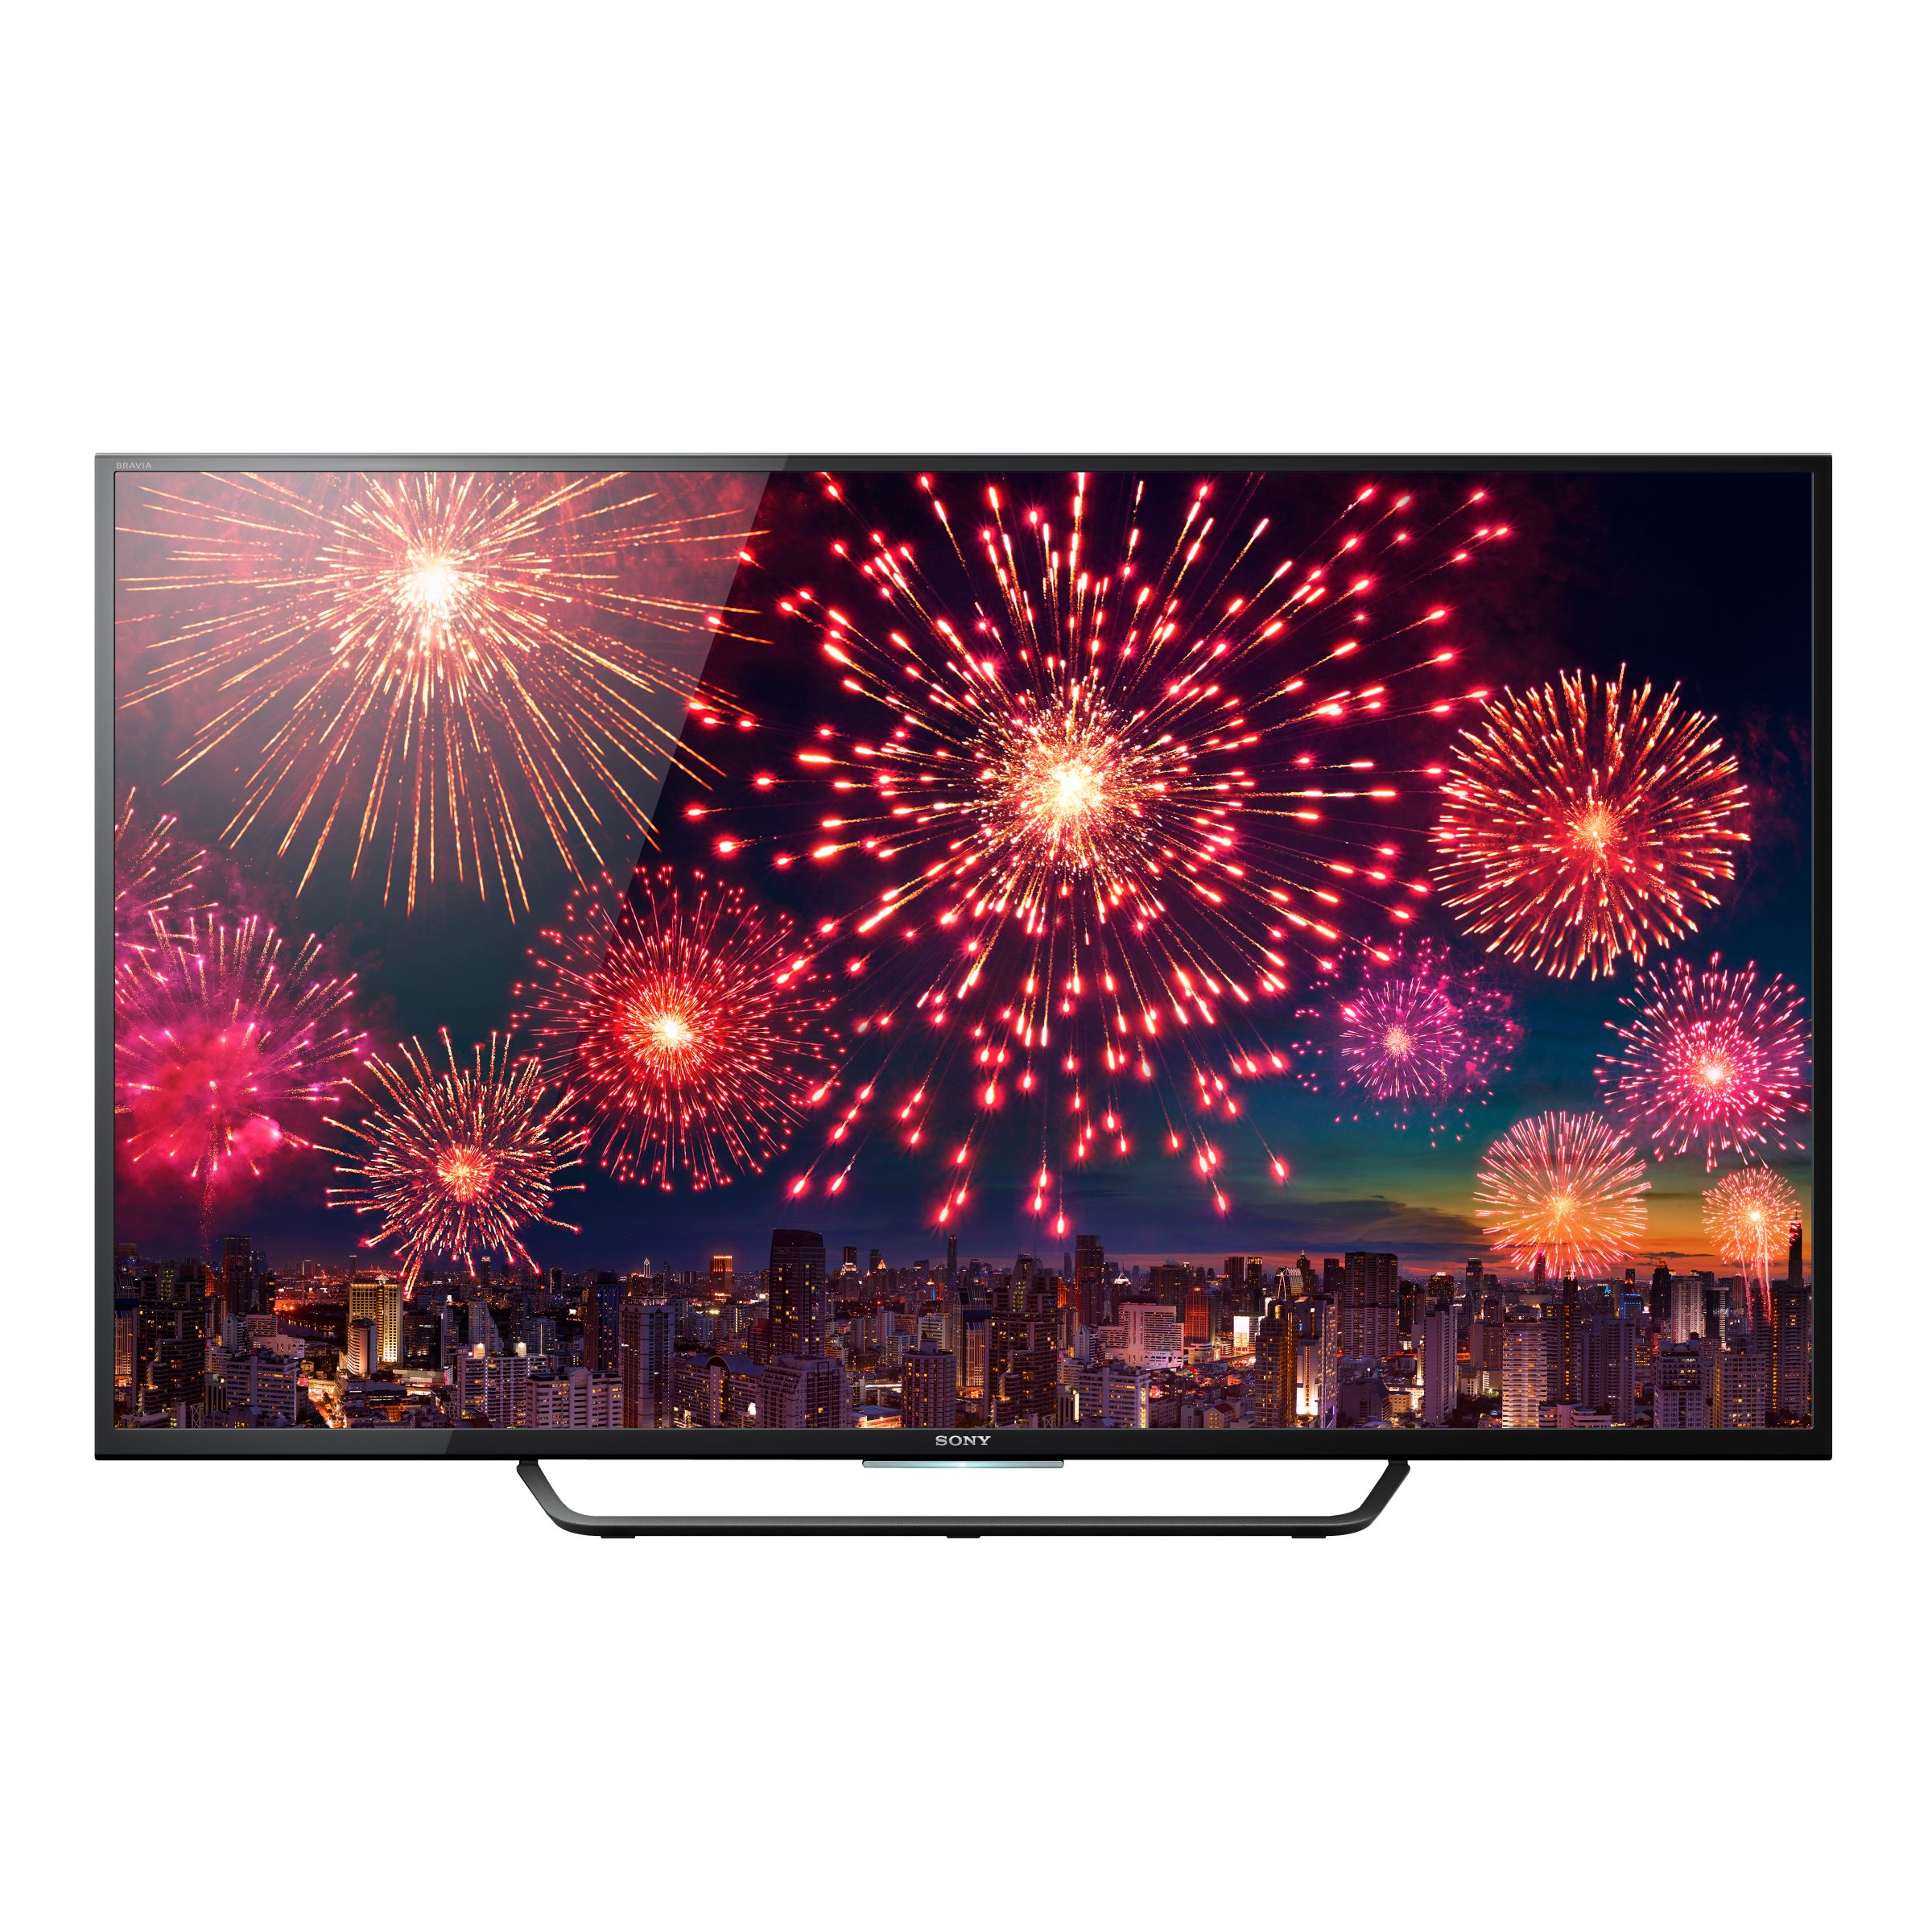 Sony Bravia KD49X8005 4K Ultra HD LED Android TV, 49" with Freeview HD, Youview & Built-In Wi-Fi